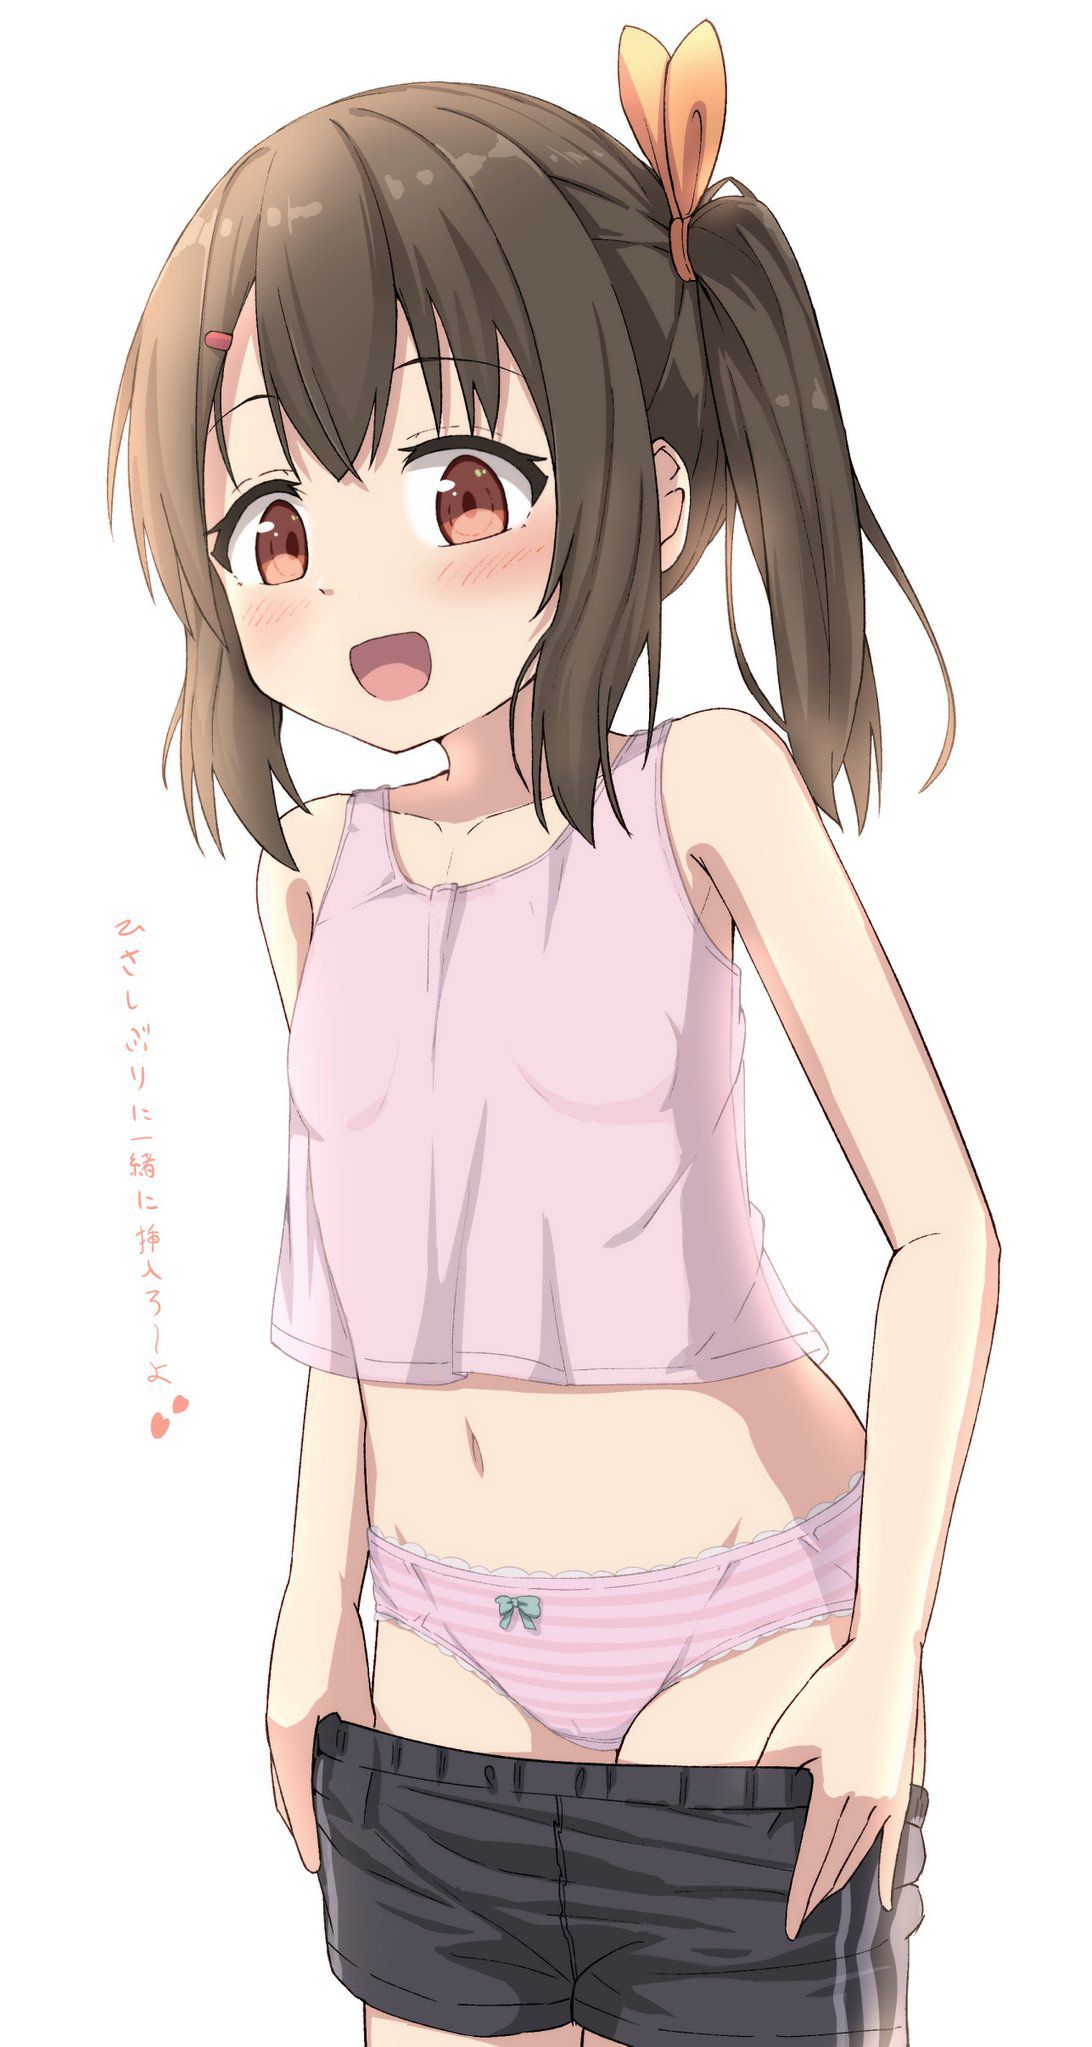 【Excited about Lori pants】 Lori pants secondary erotic image excited by looking at the cute figure of the treasure of the pants of the secondary loli girl 25